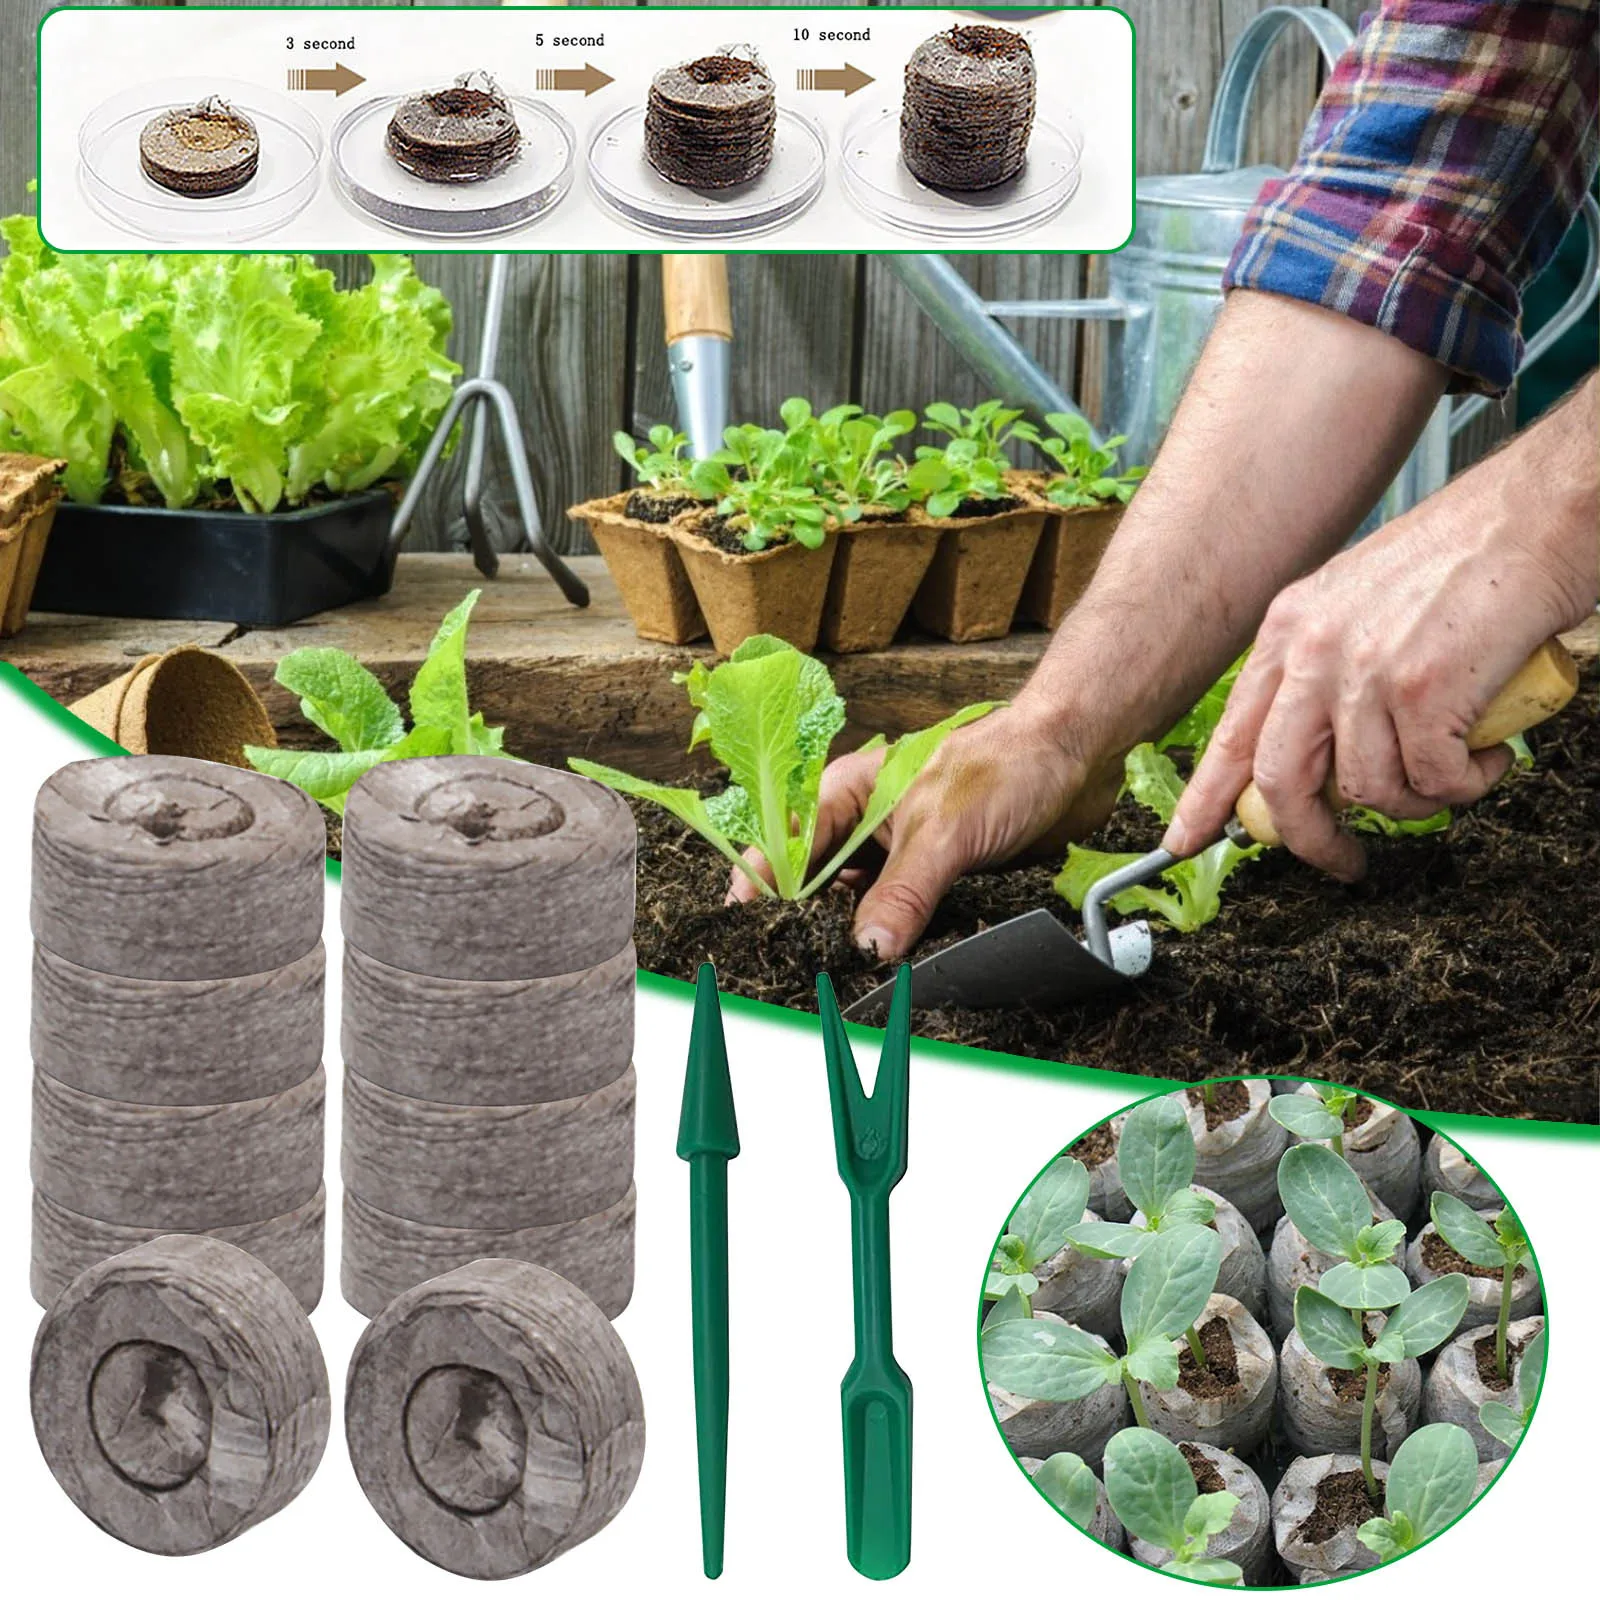 

10Pcs Peat Pellets Seed Starting Plugs Pallet Seedling Soil Block Maker Starting Plugs Seeds Starter Professional For Garden